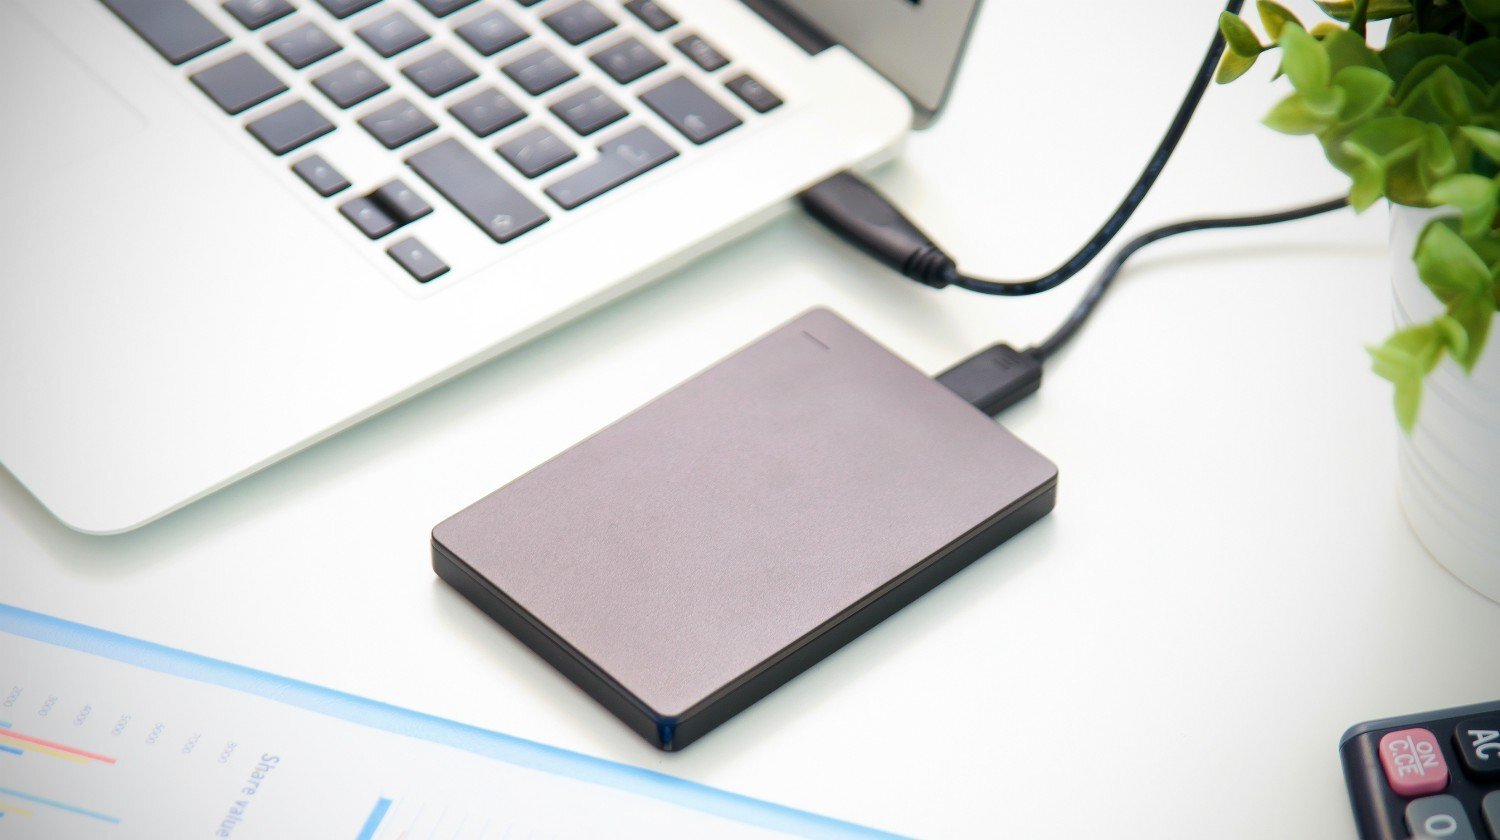 How To Boot Windows From A External Hard Drive